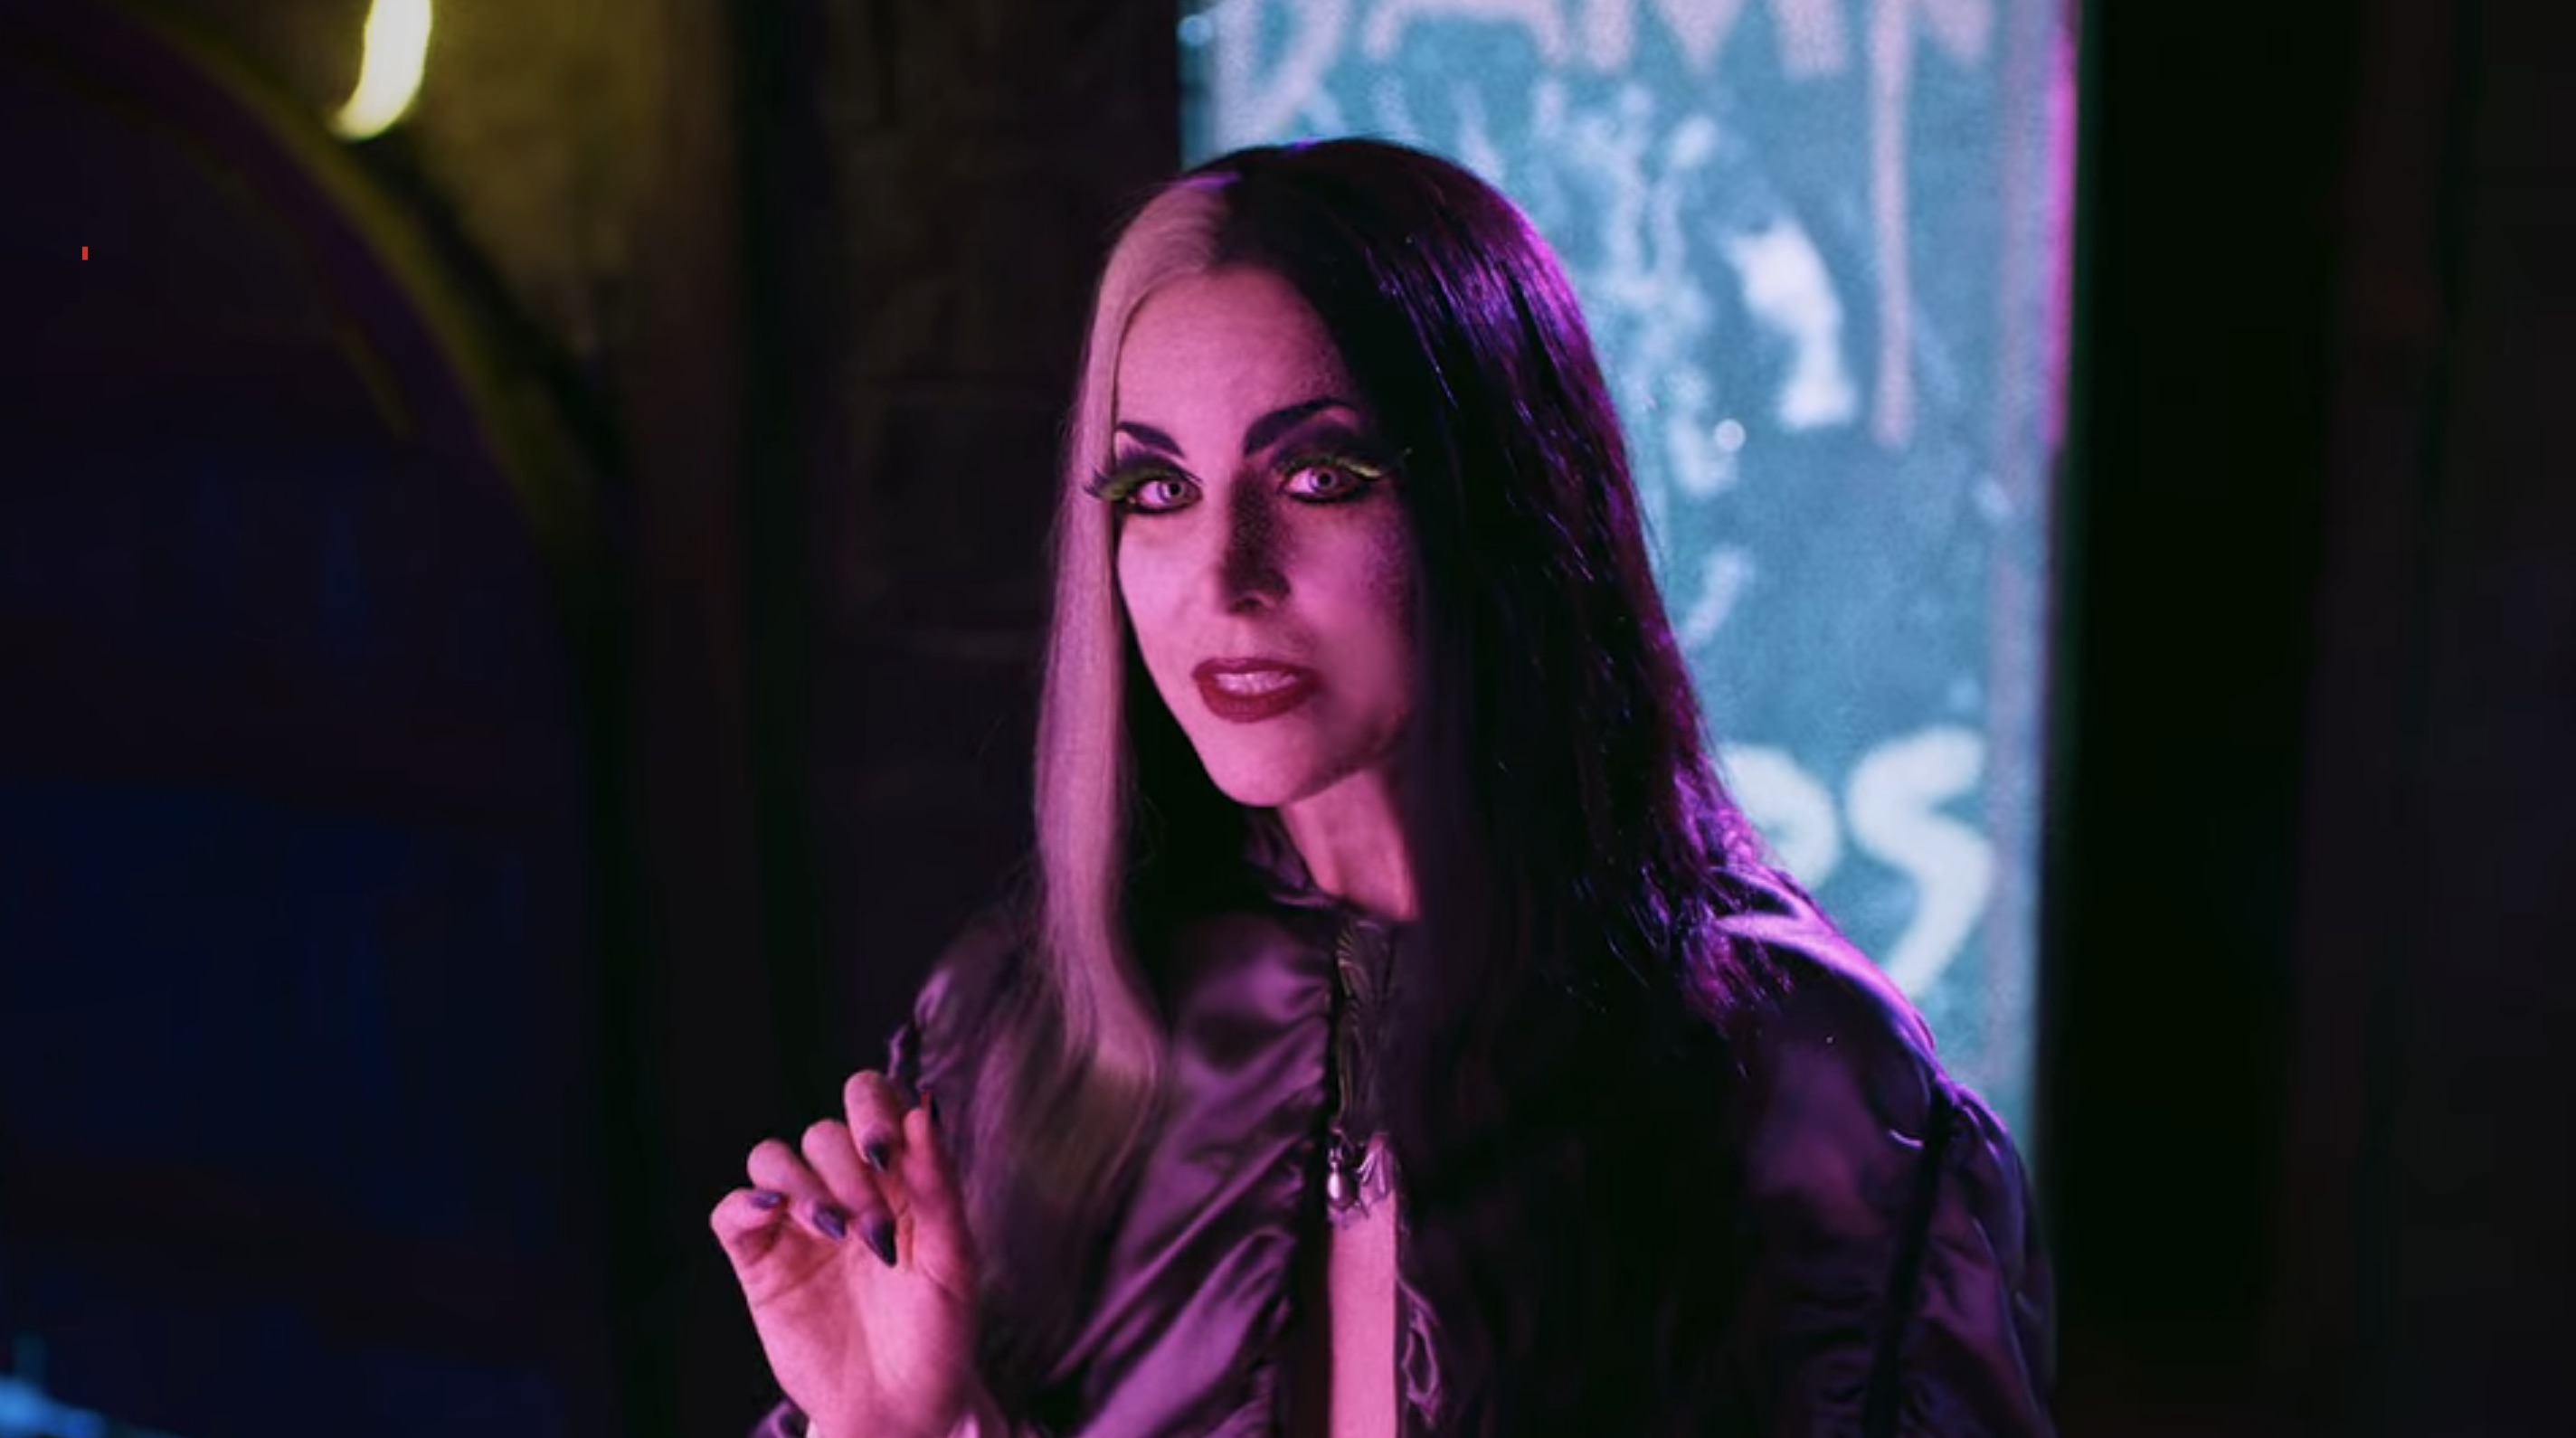 The Munsters Cast on Netflix - Sheri Moon Zombie as Lily Munster